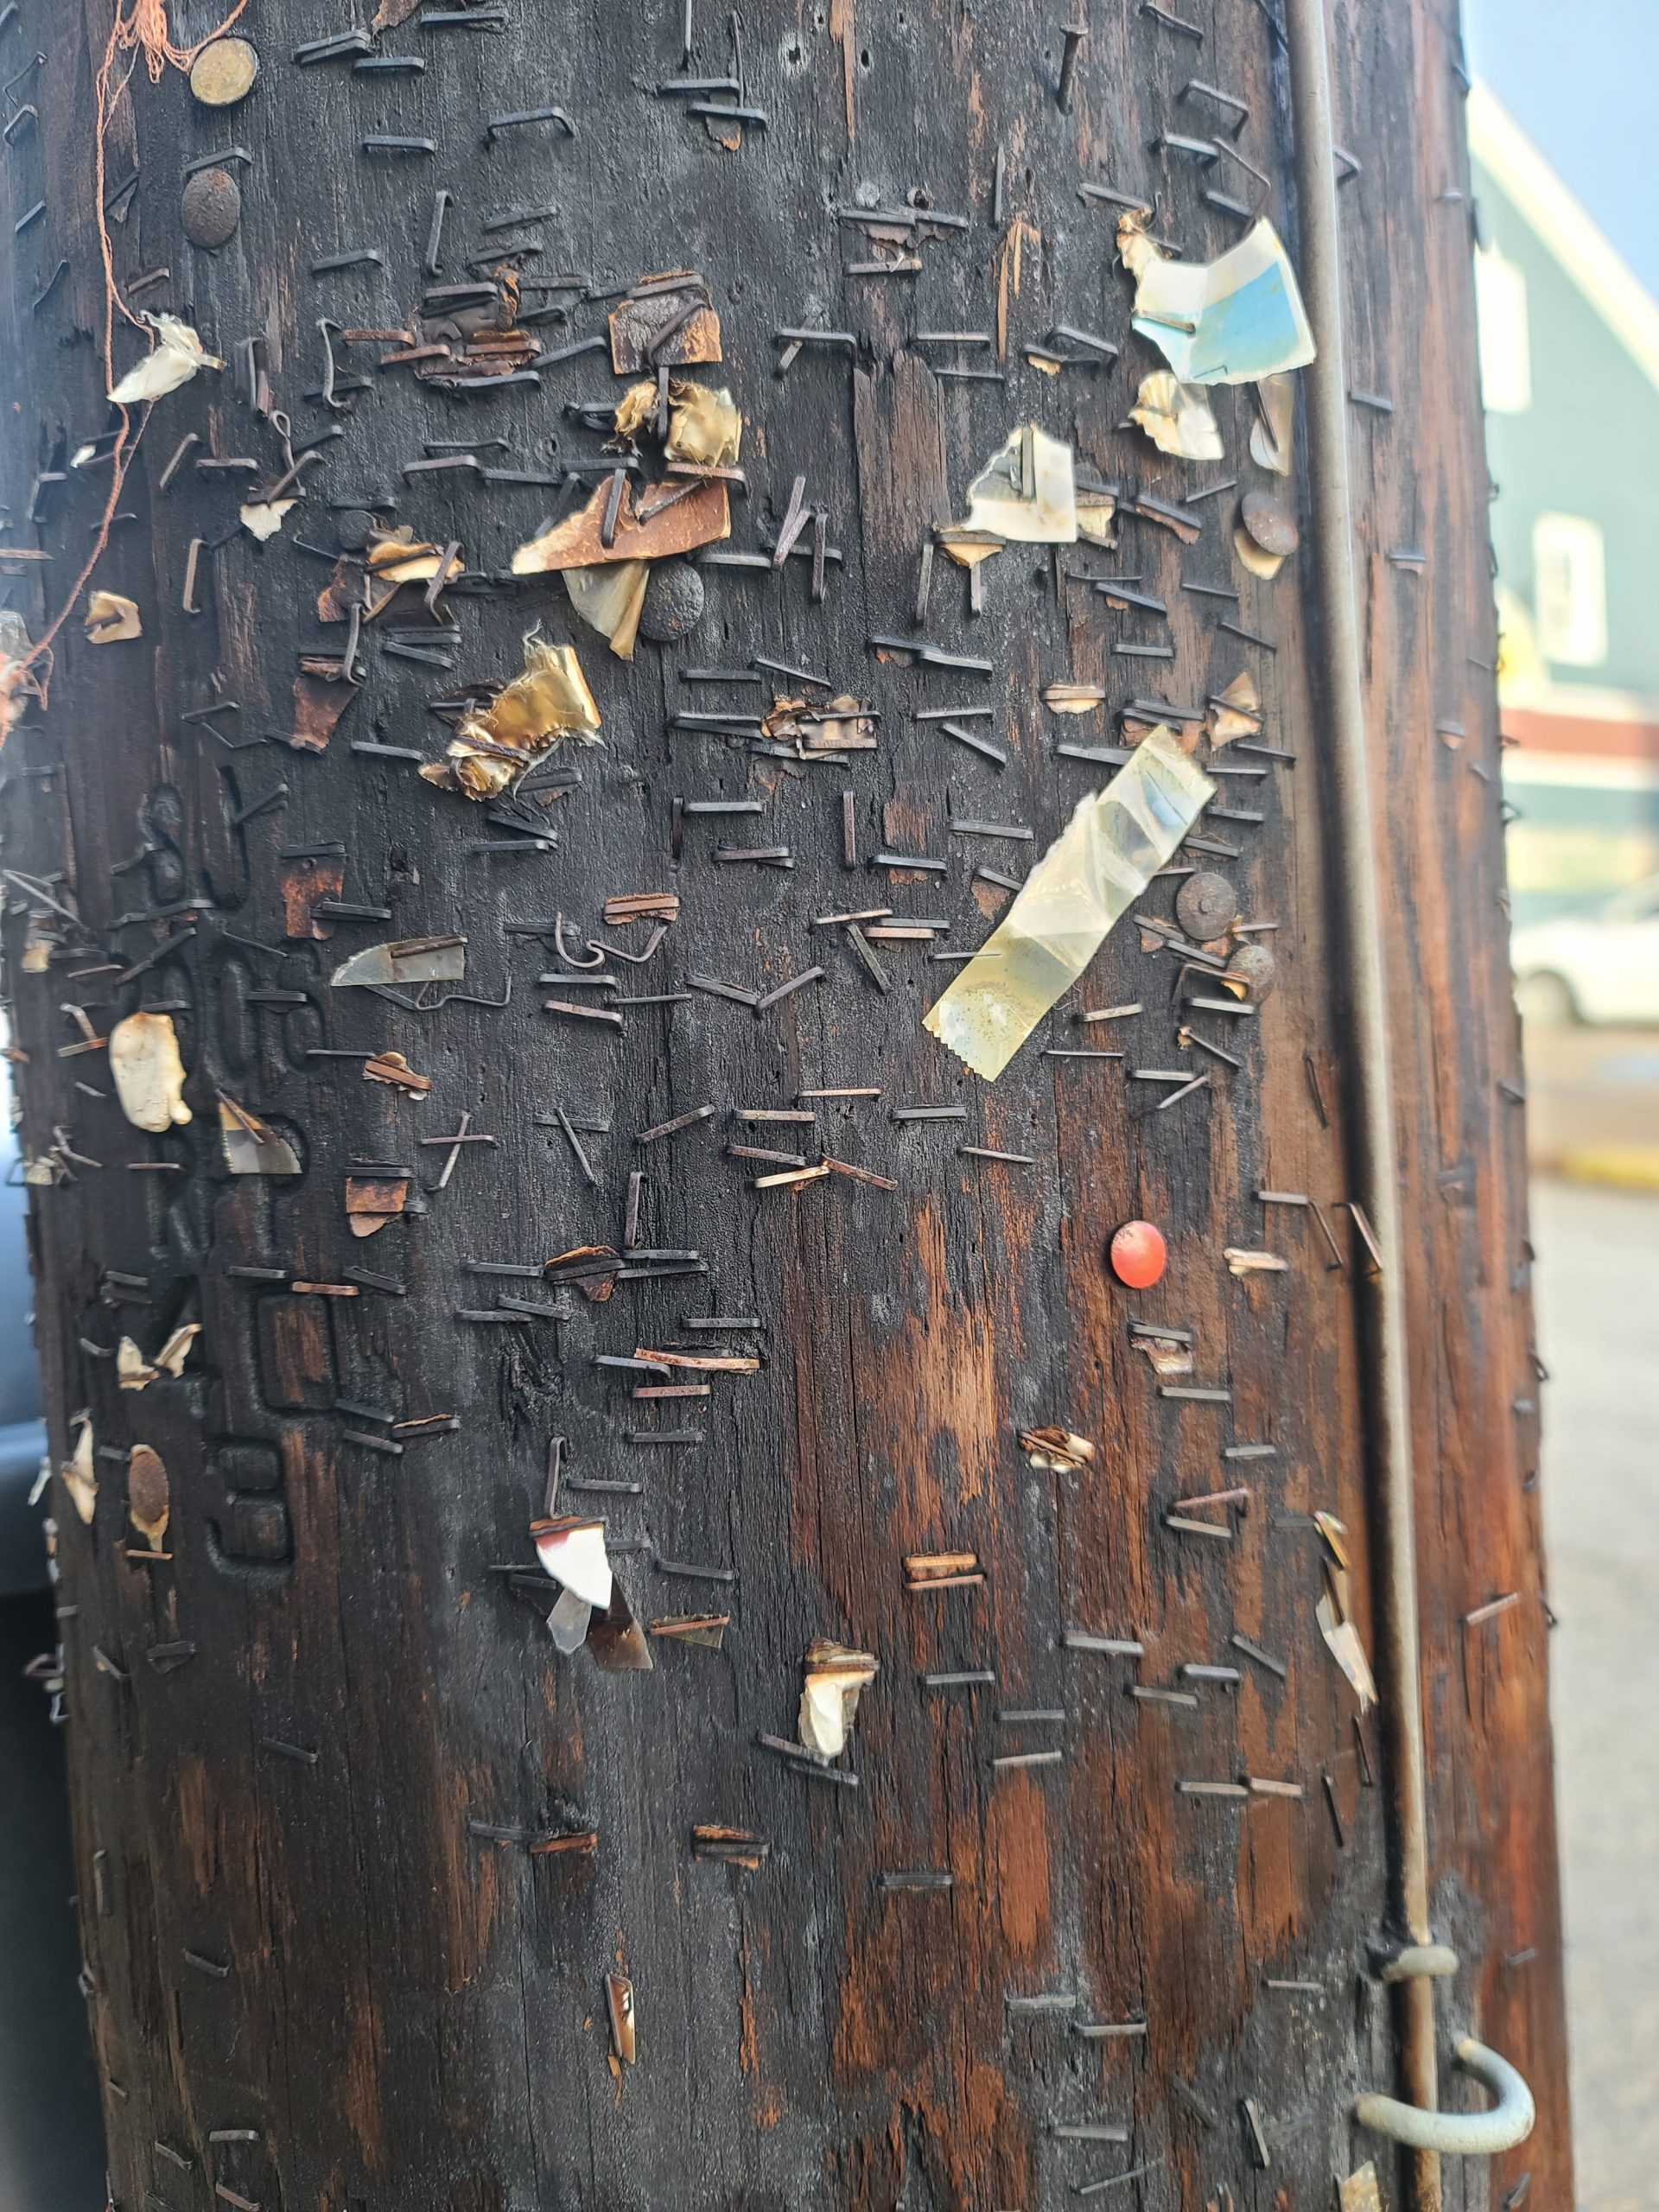 staples, tacks and nails left over from remnants of posting signs and flyers on an electrical pole, posing danger to lineworkers